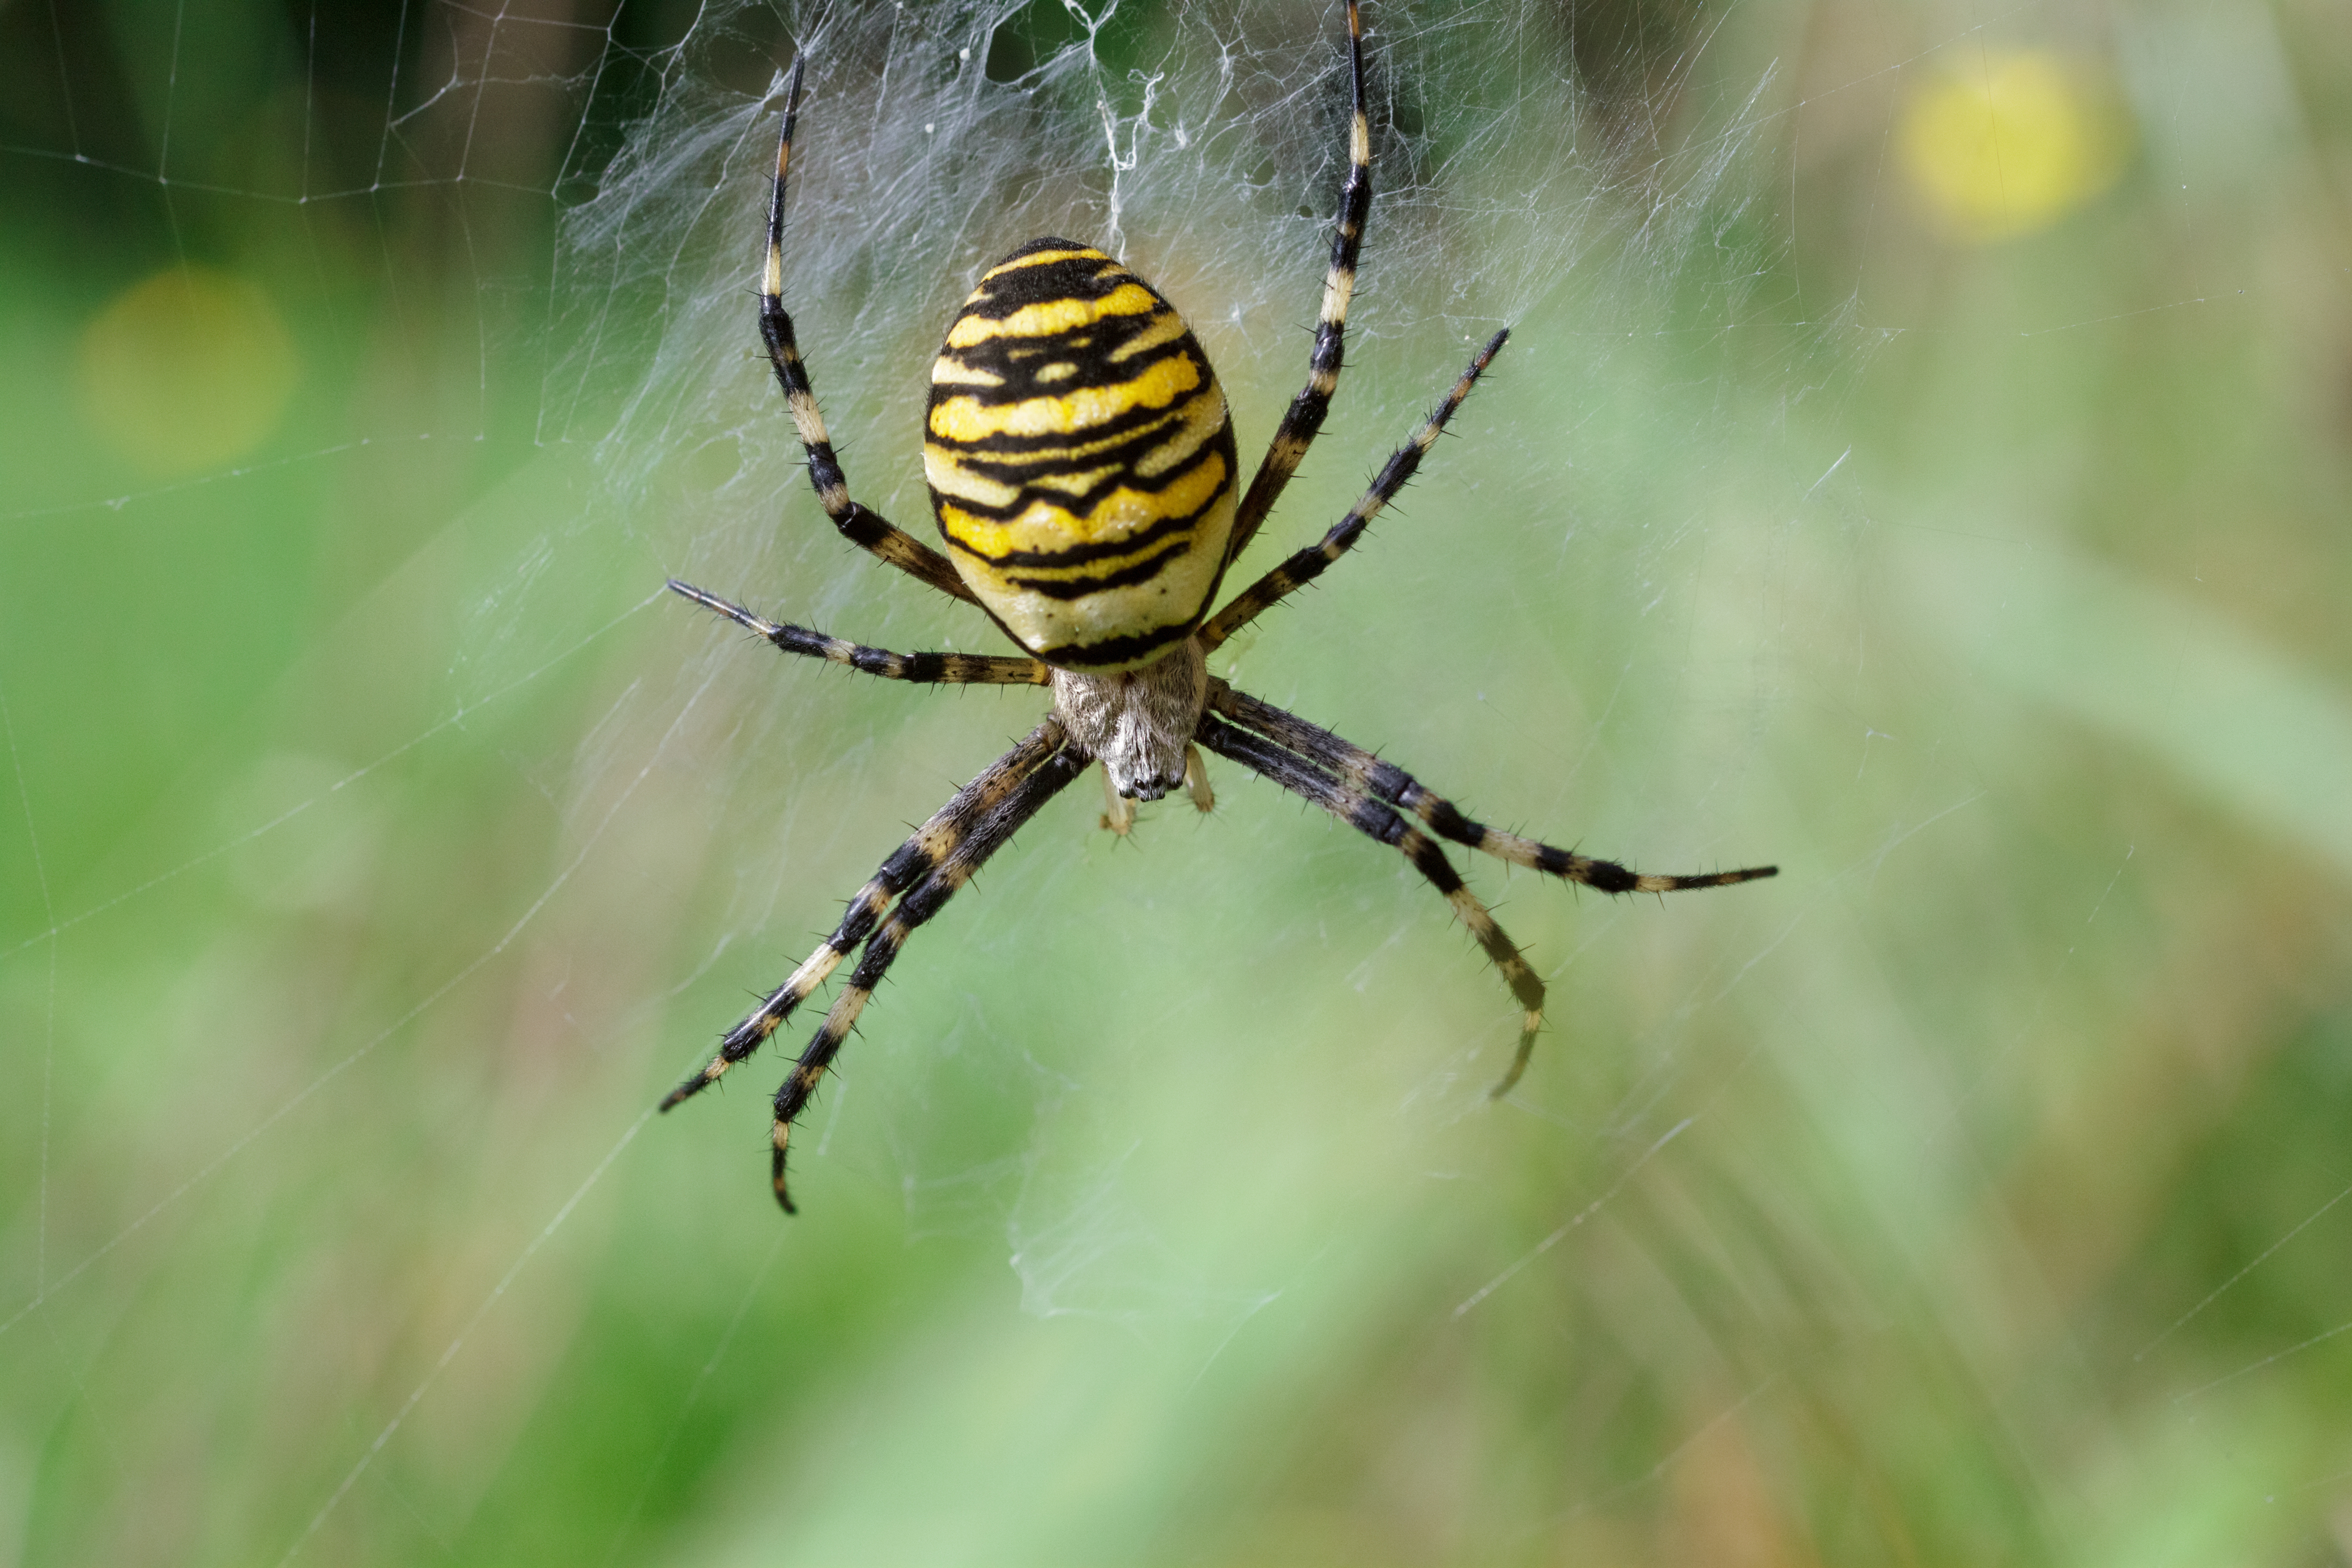 These Are The Aggressive And Poisonous Spiders To Look Out For In